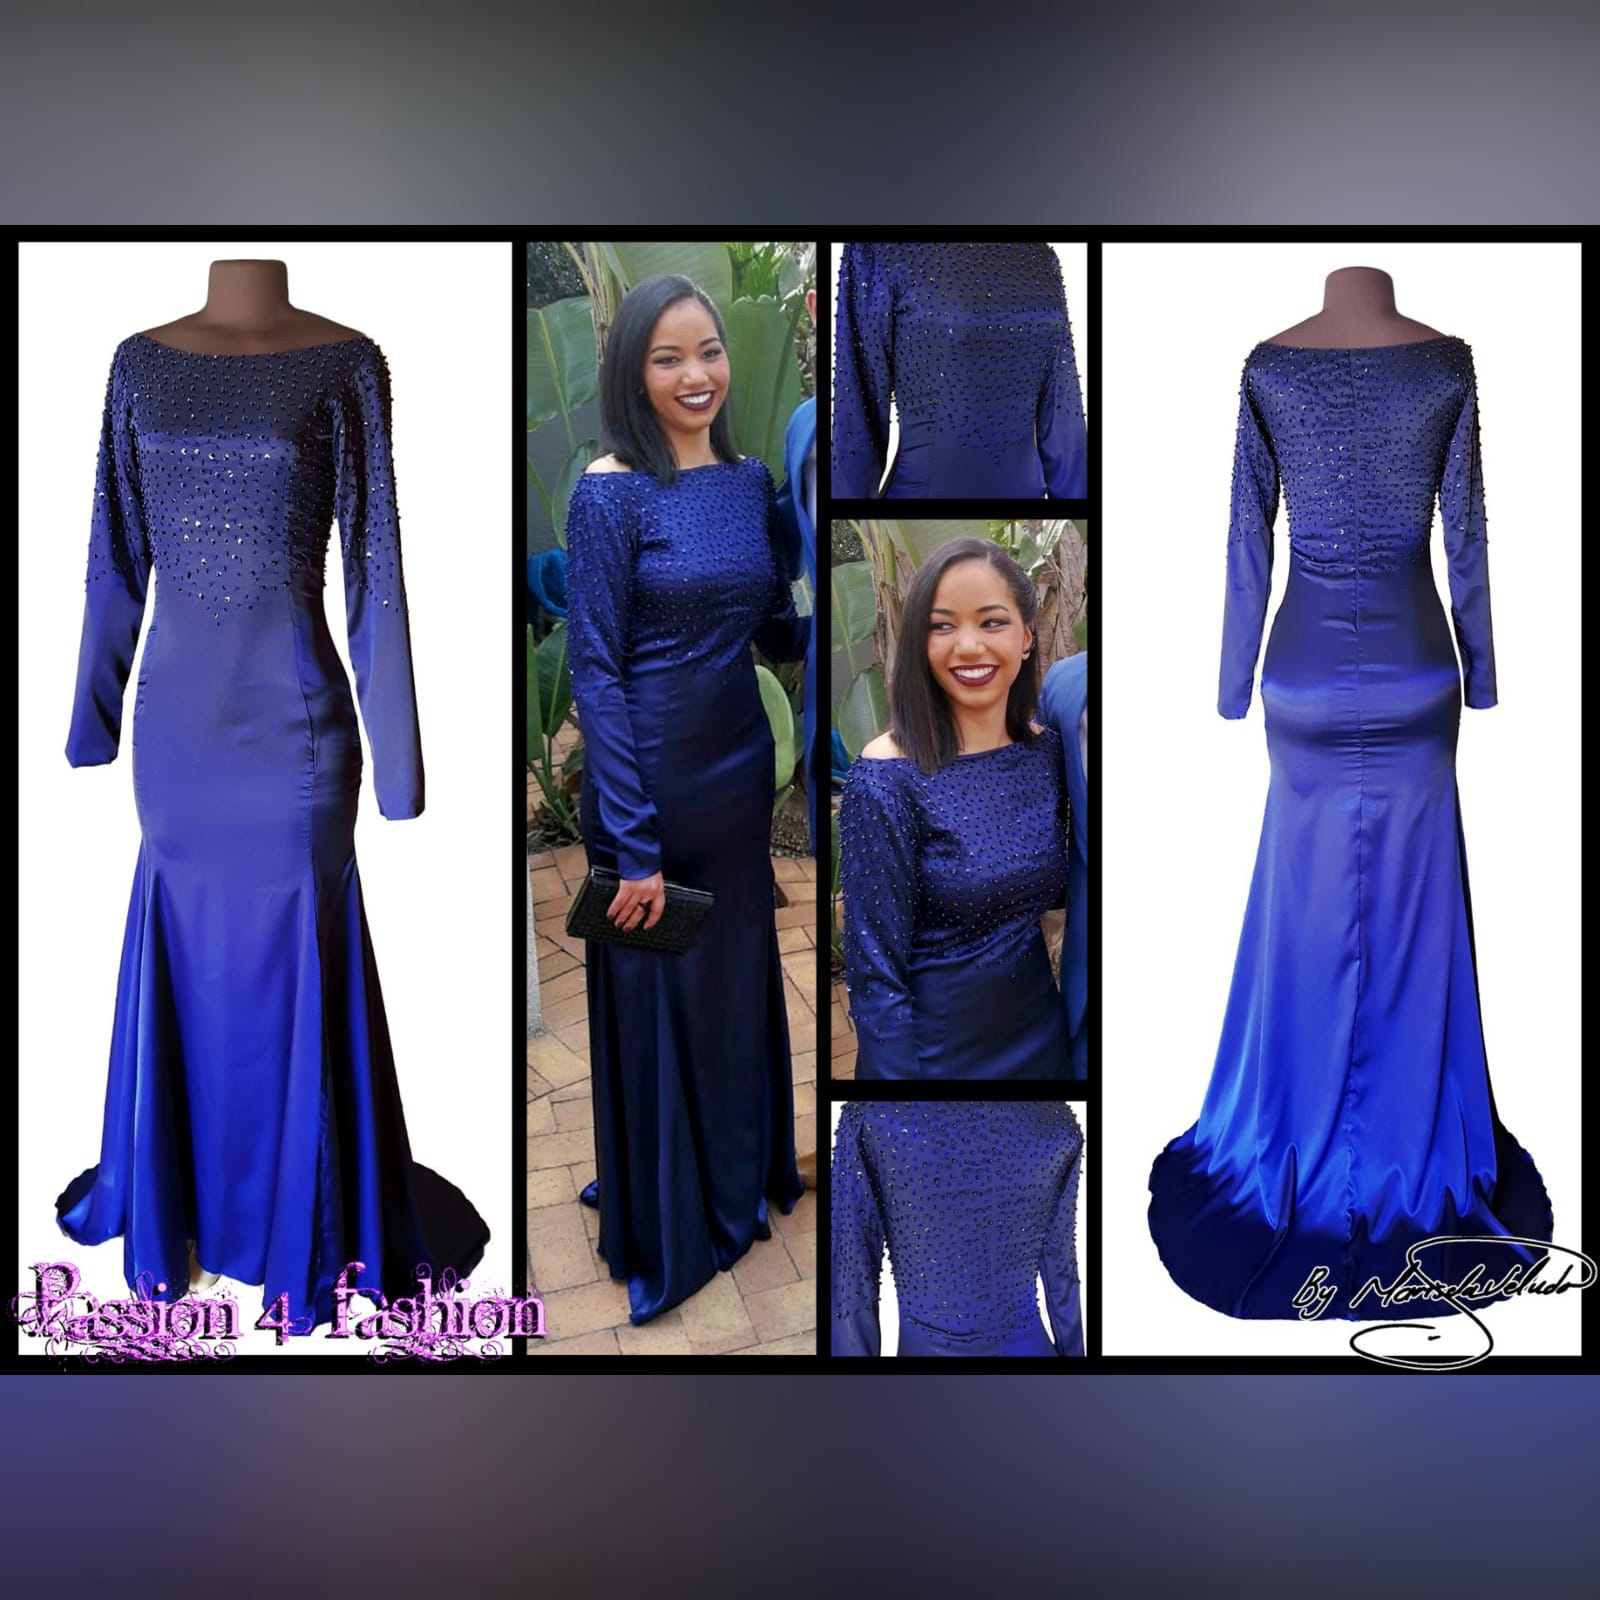 Navy blue satin tight fitting long prom dress 3 beaded prom dress in navy blue. Sophisticated and elegant mermaid satin dress, jewel neckline, long sleeves and a small train. Two-sided bodice with sleeves with beads, pearls, stones and sequins.